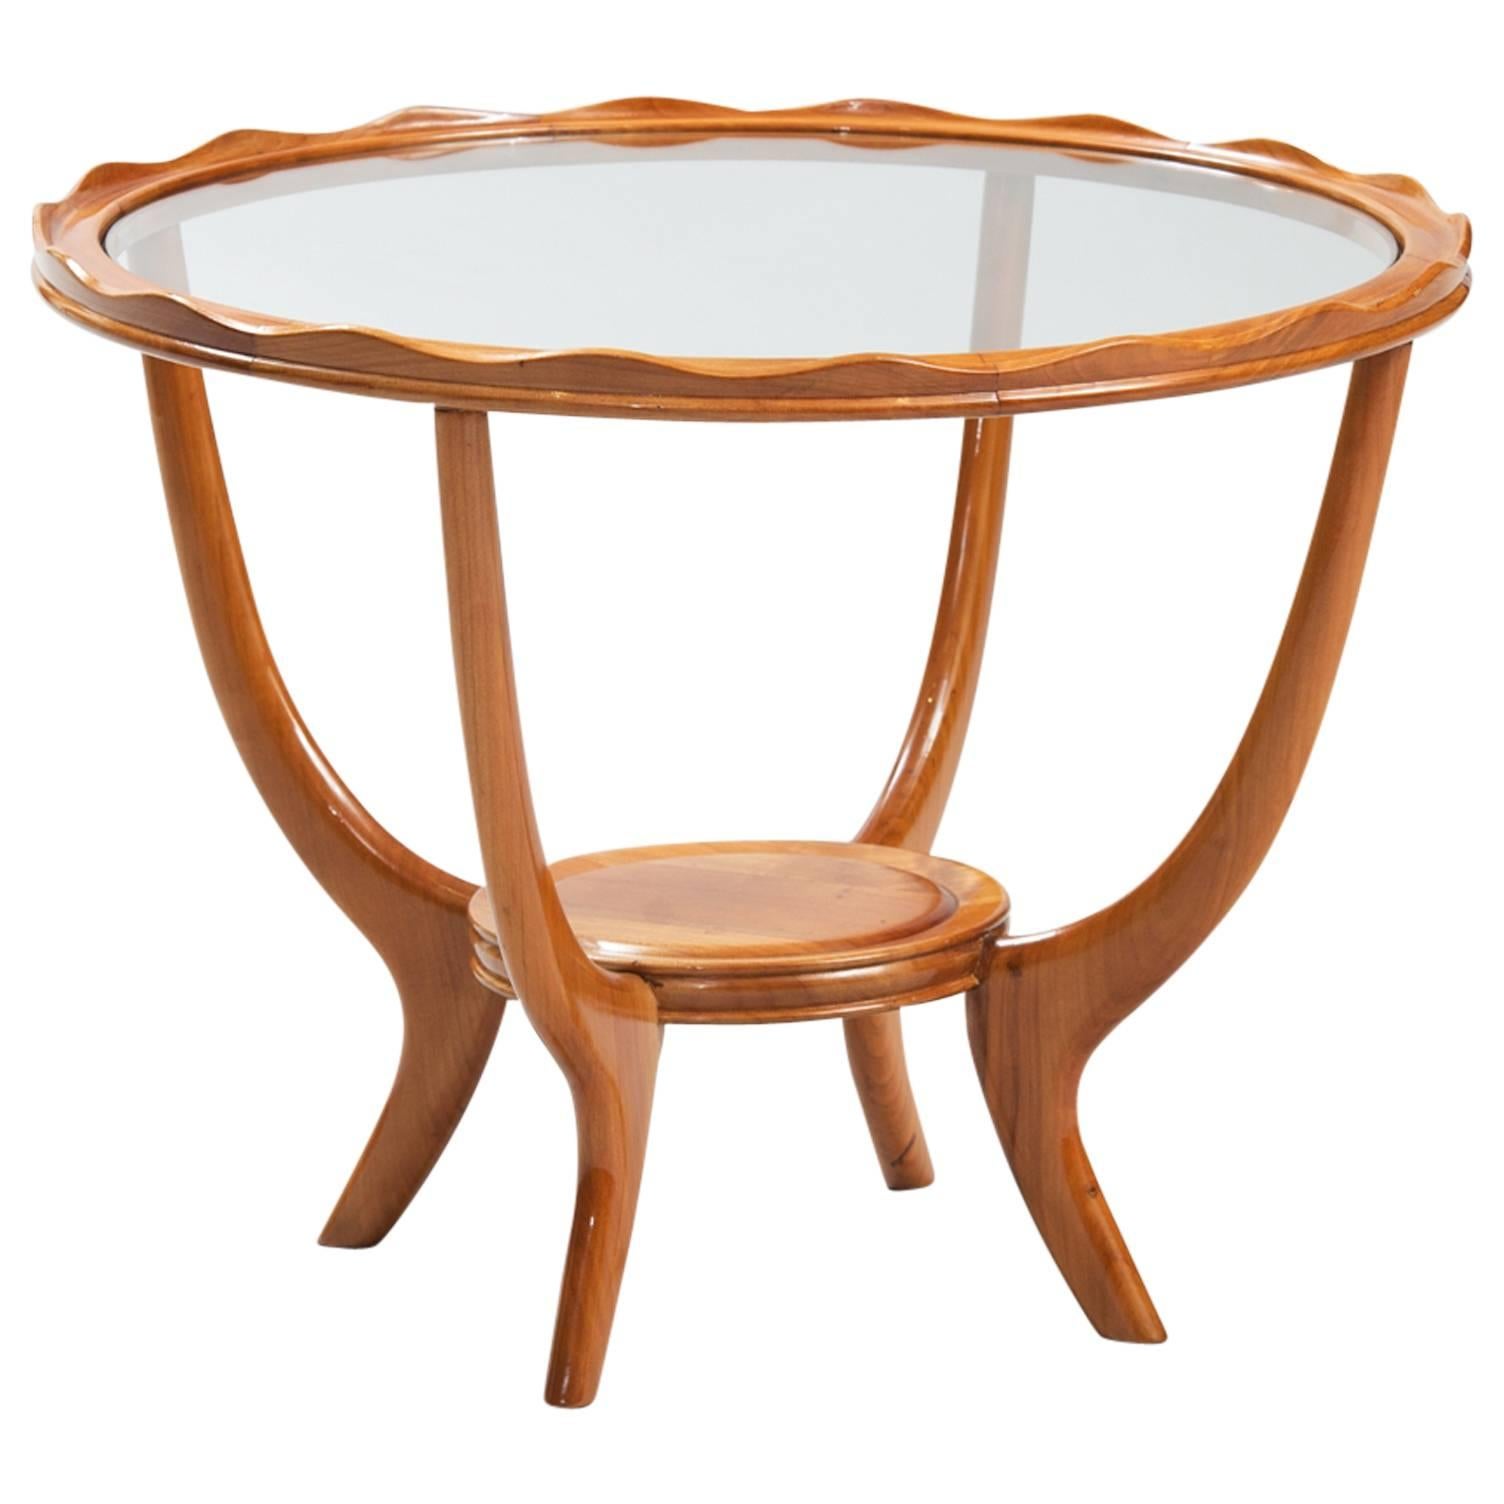 Italian Midcentury Sycamore Side Table